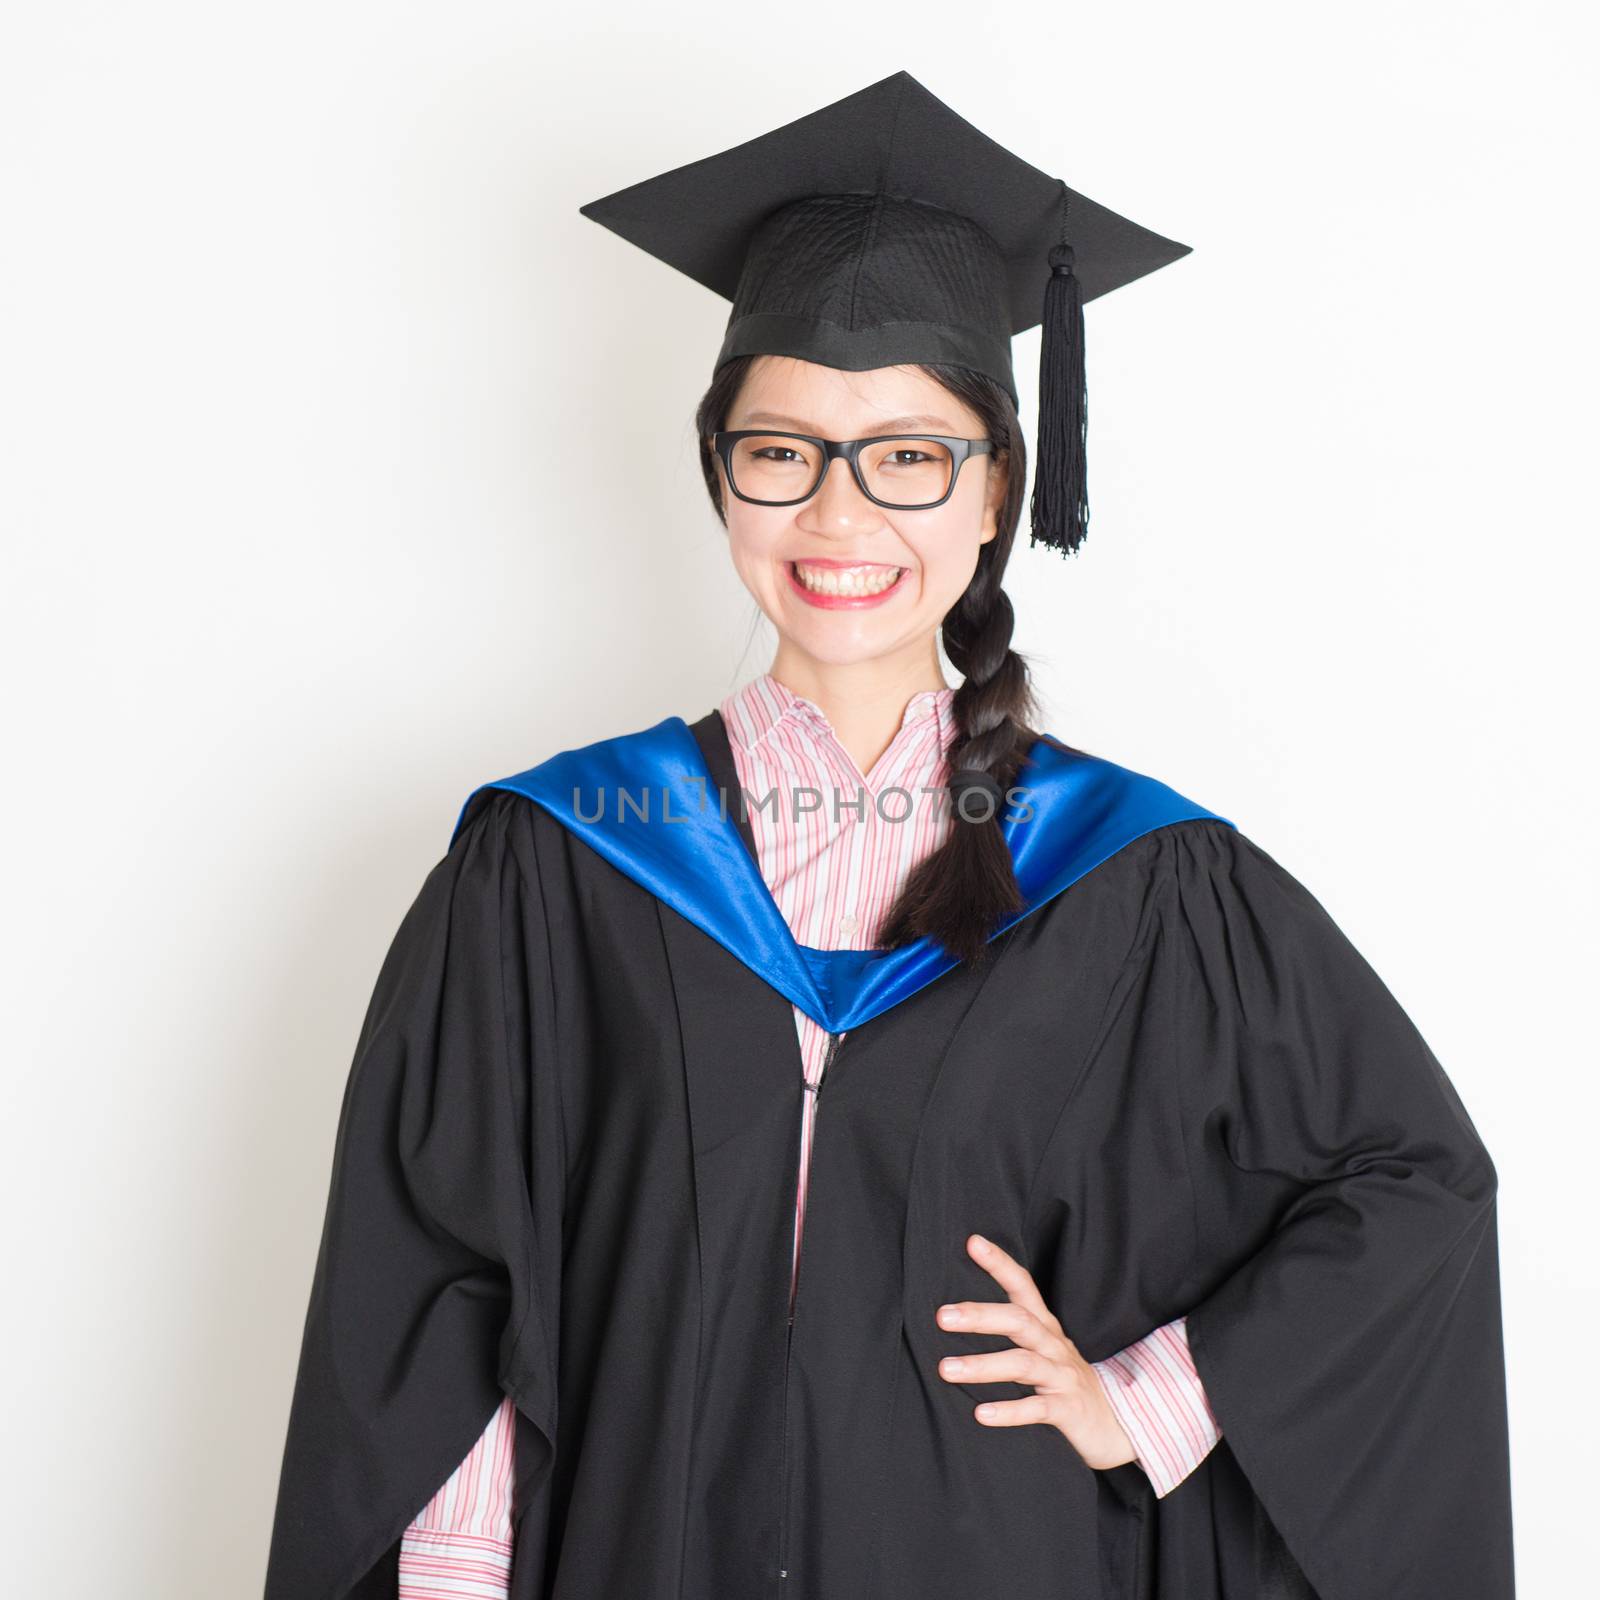 University student in graduation gown and cap. Portrait of east  Asian female model standing on plain background.